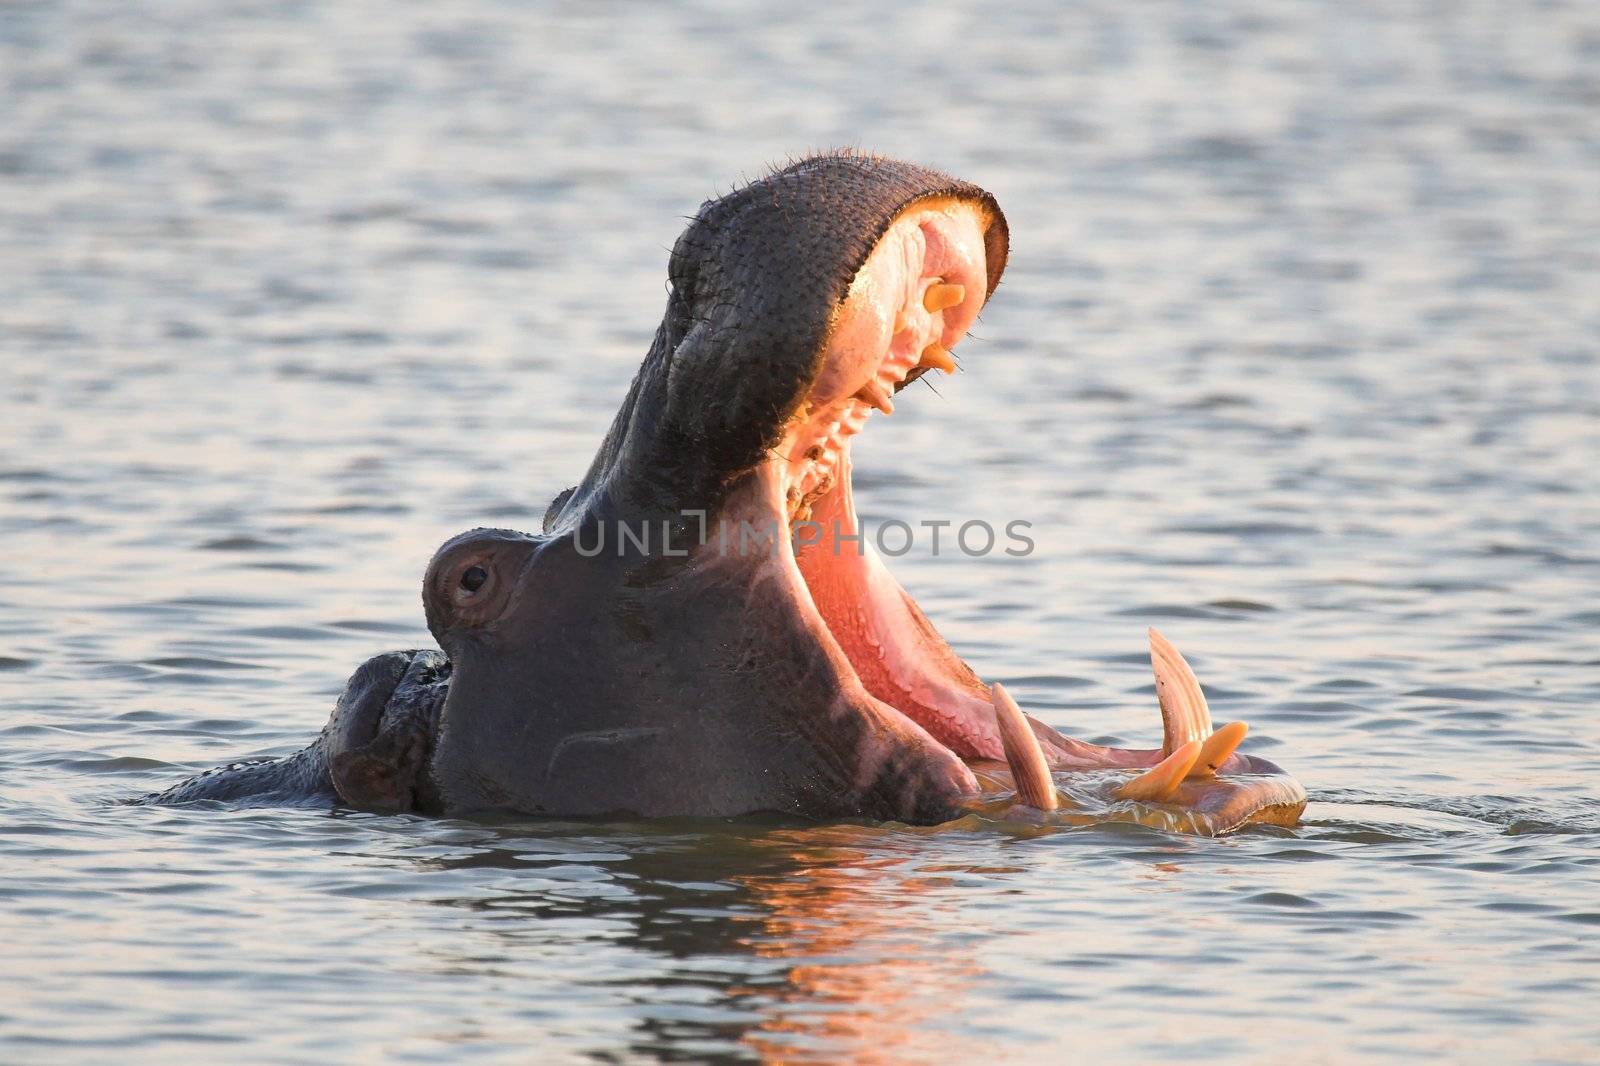 Hippo Yawning and showing its teeth in a dominance display